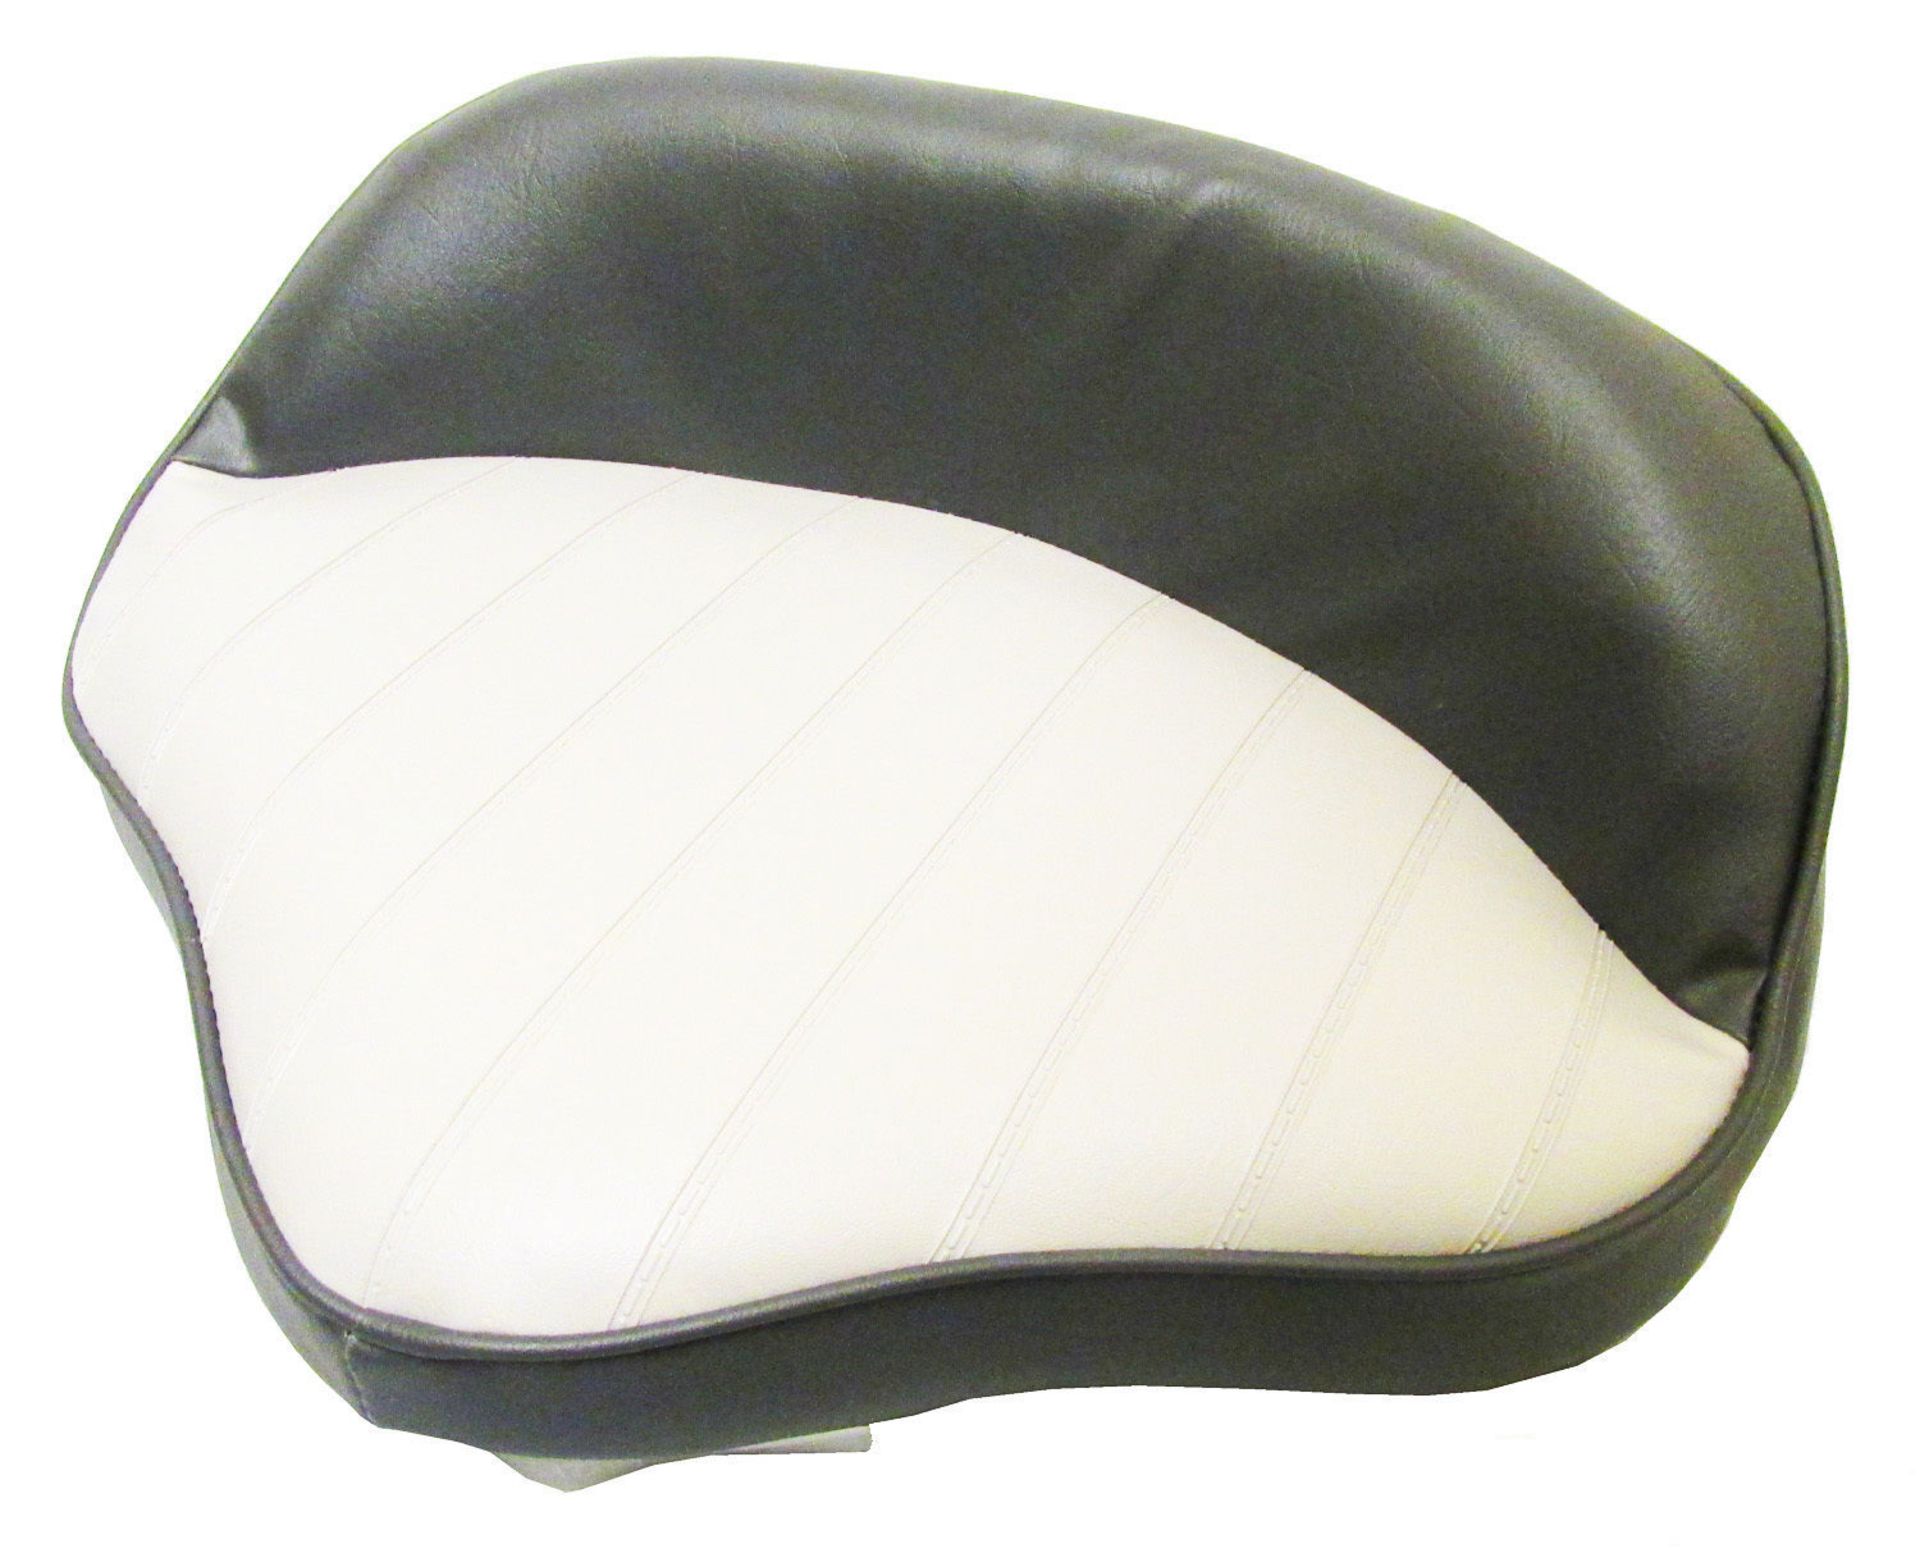 BUTT BOAT SEAT (75125) - QTY: 1 16" wide x 12.1/2" deep x 6.1/2" high and covered with marine